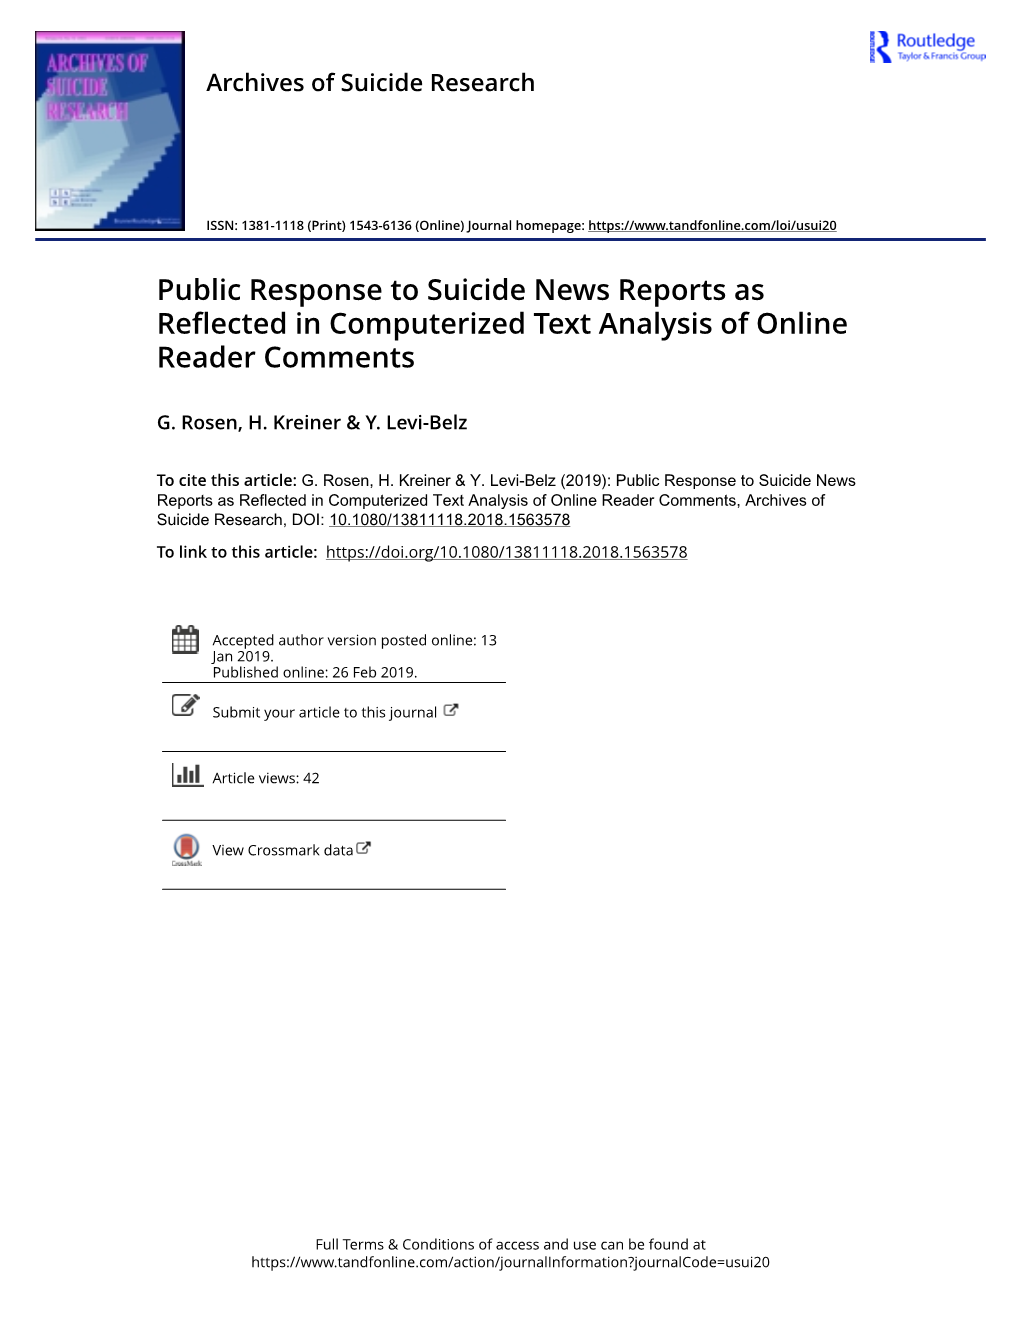 Public Response to Suicide News Reports As Reflected in Computerized Text Analysis of Online Reader Comments